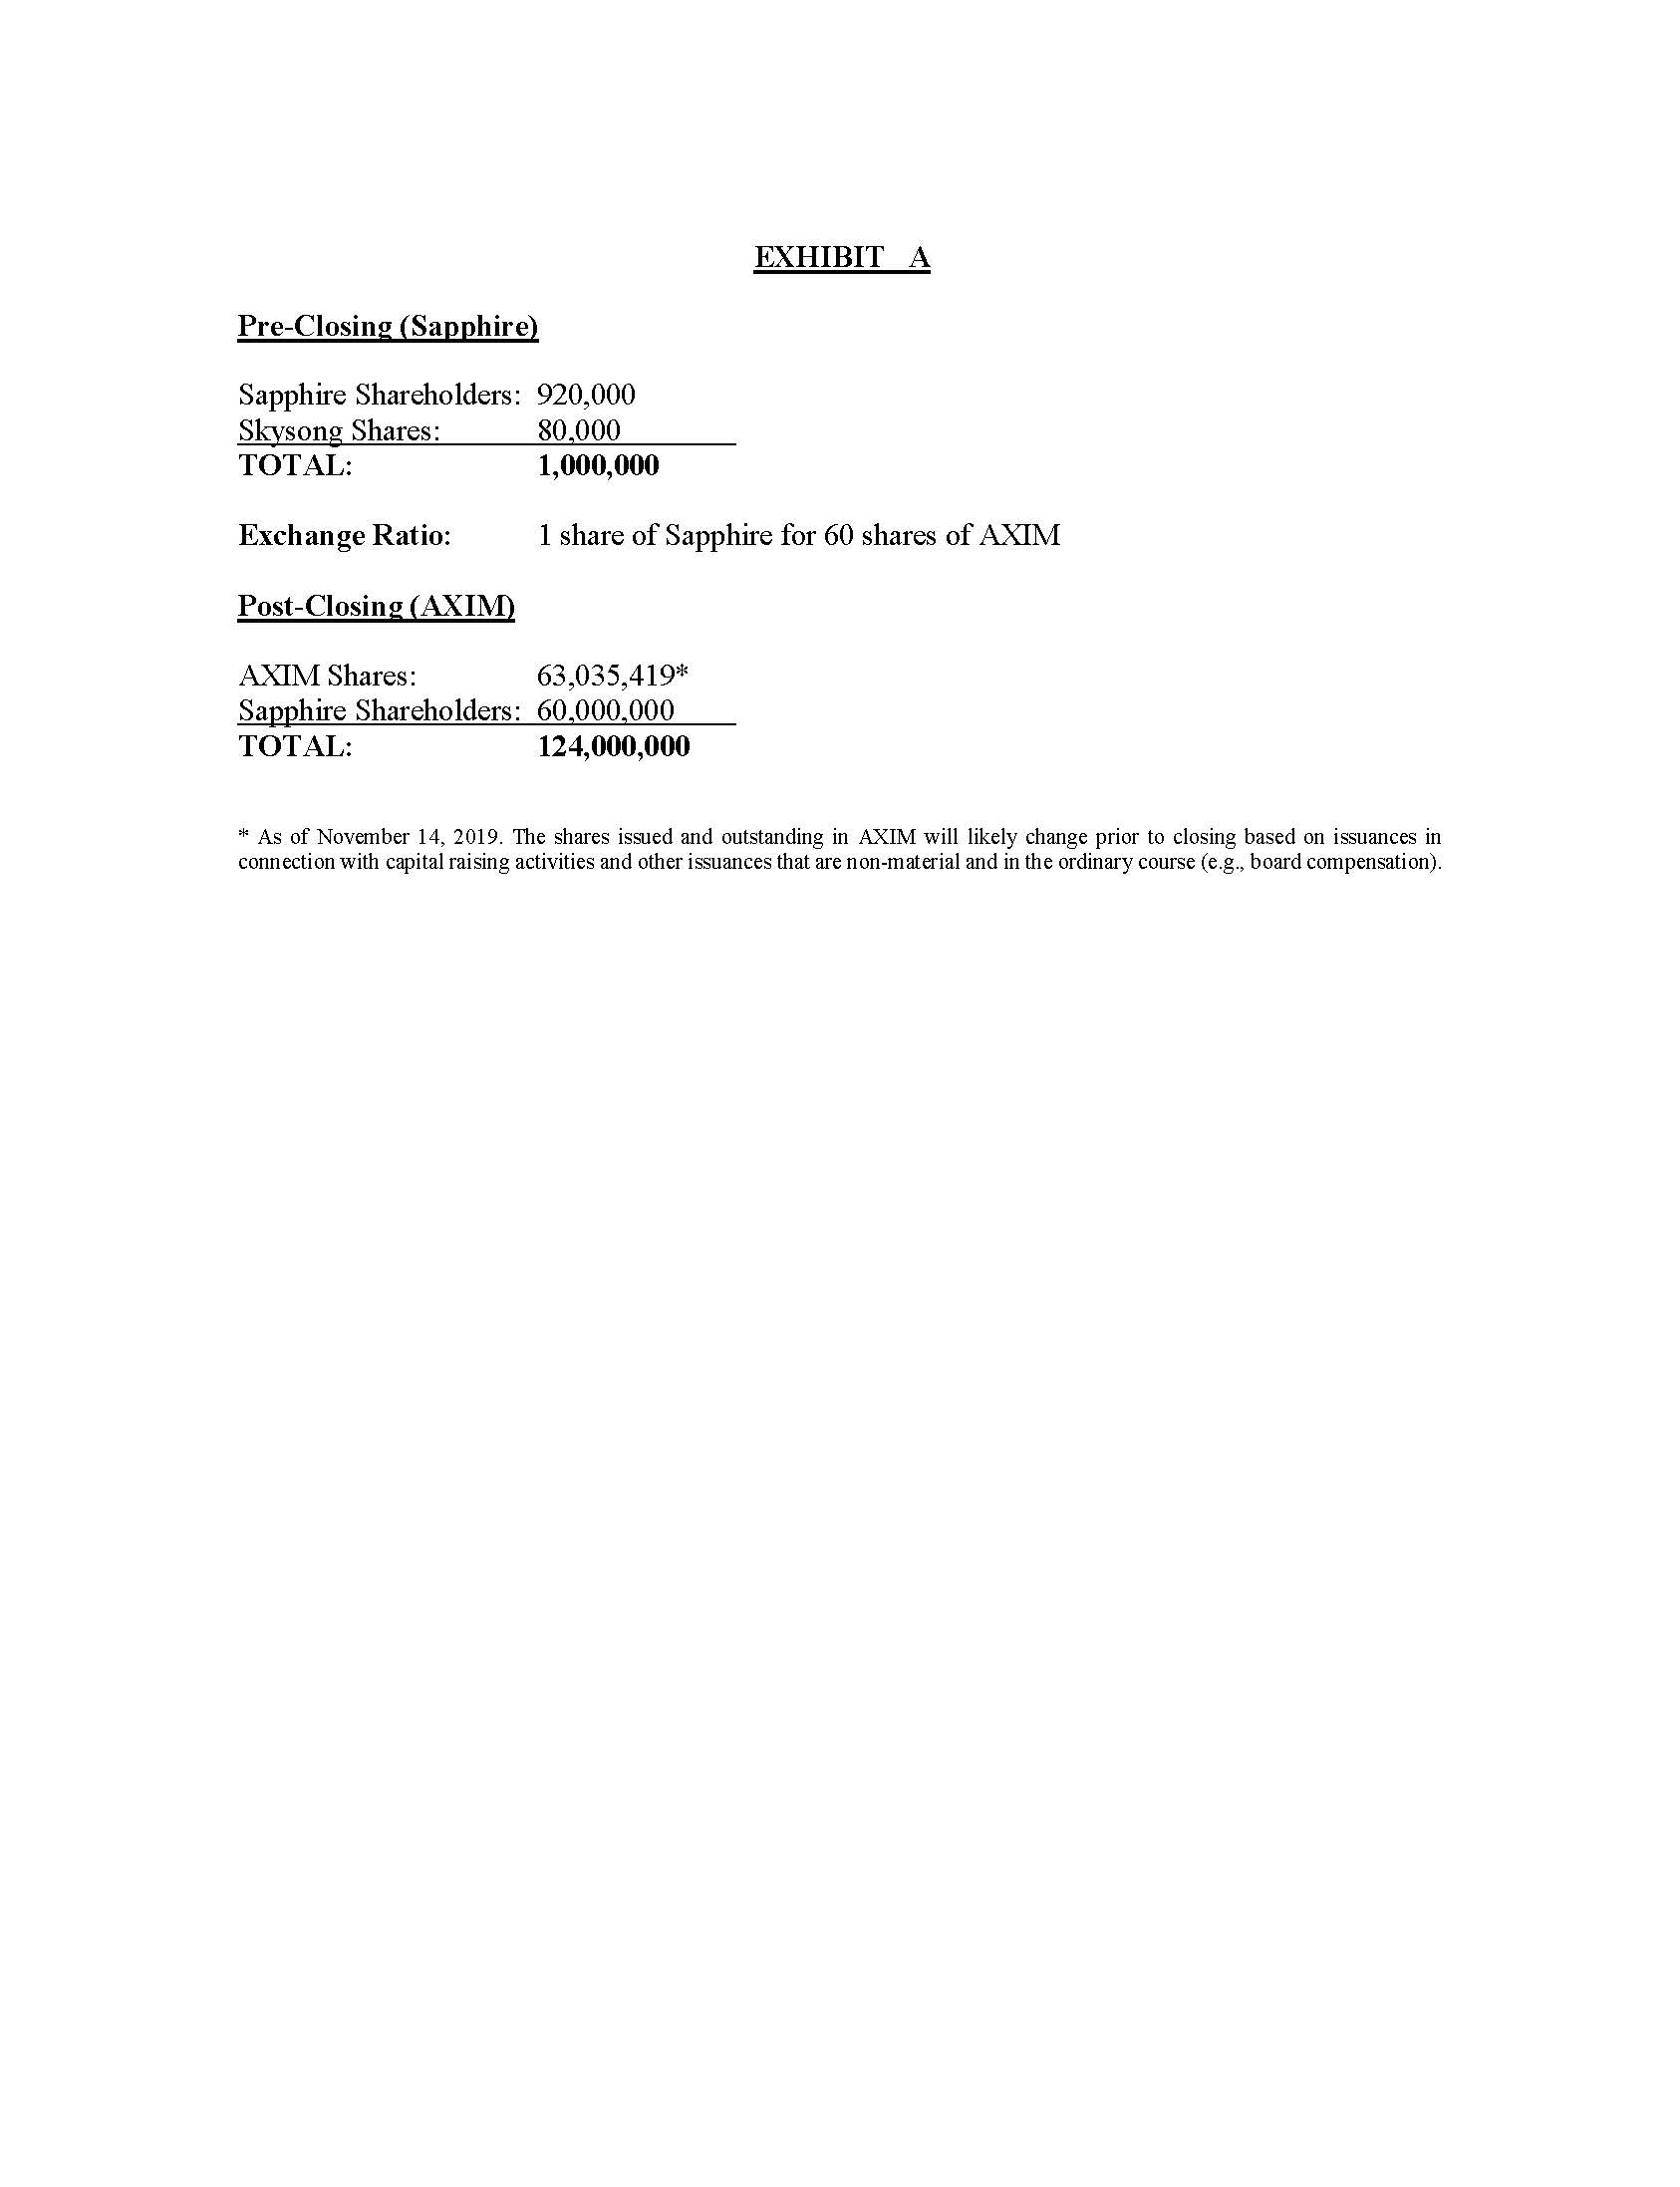 Term Sheet - AXIM  Sapphire (Executed)_Page_5.jpg